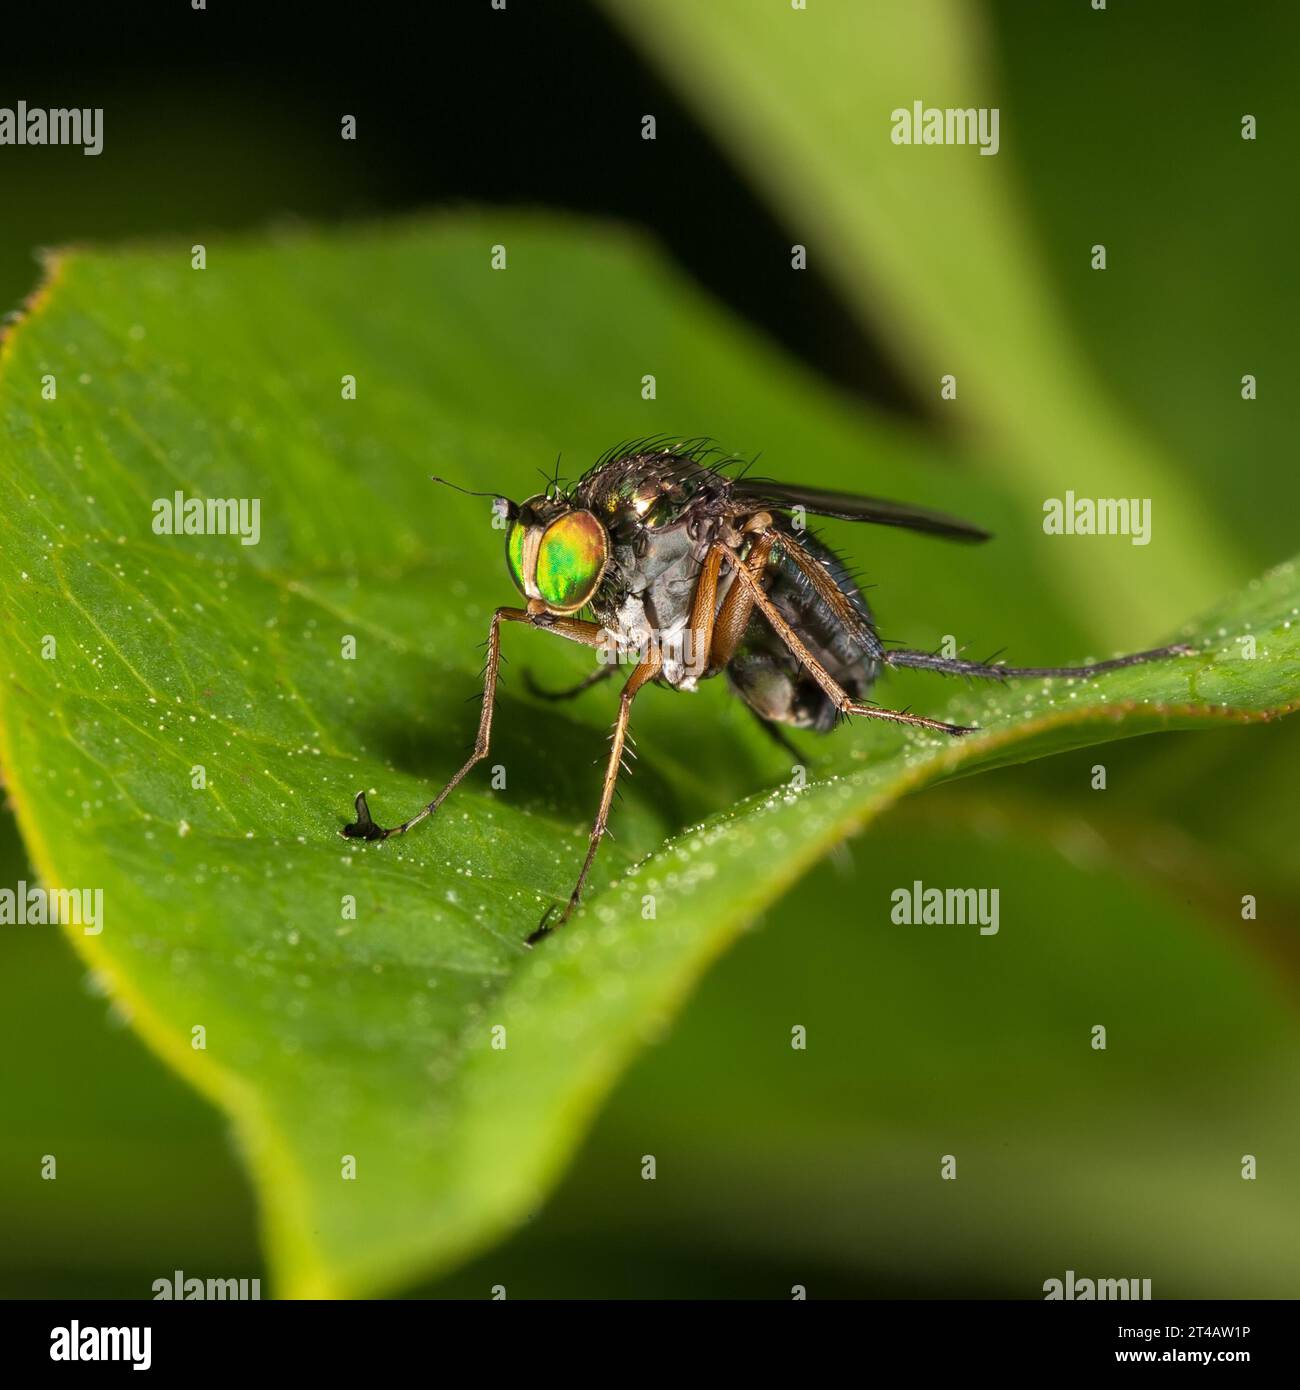 A small fly with rainbow eyes on a plant leaf. Macro photography. Stock Photo